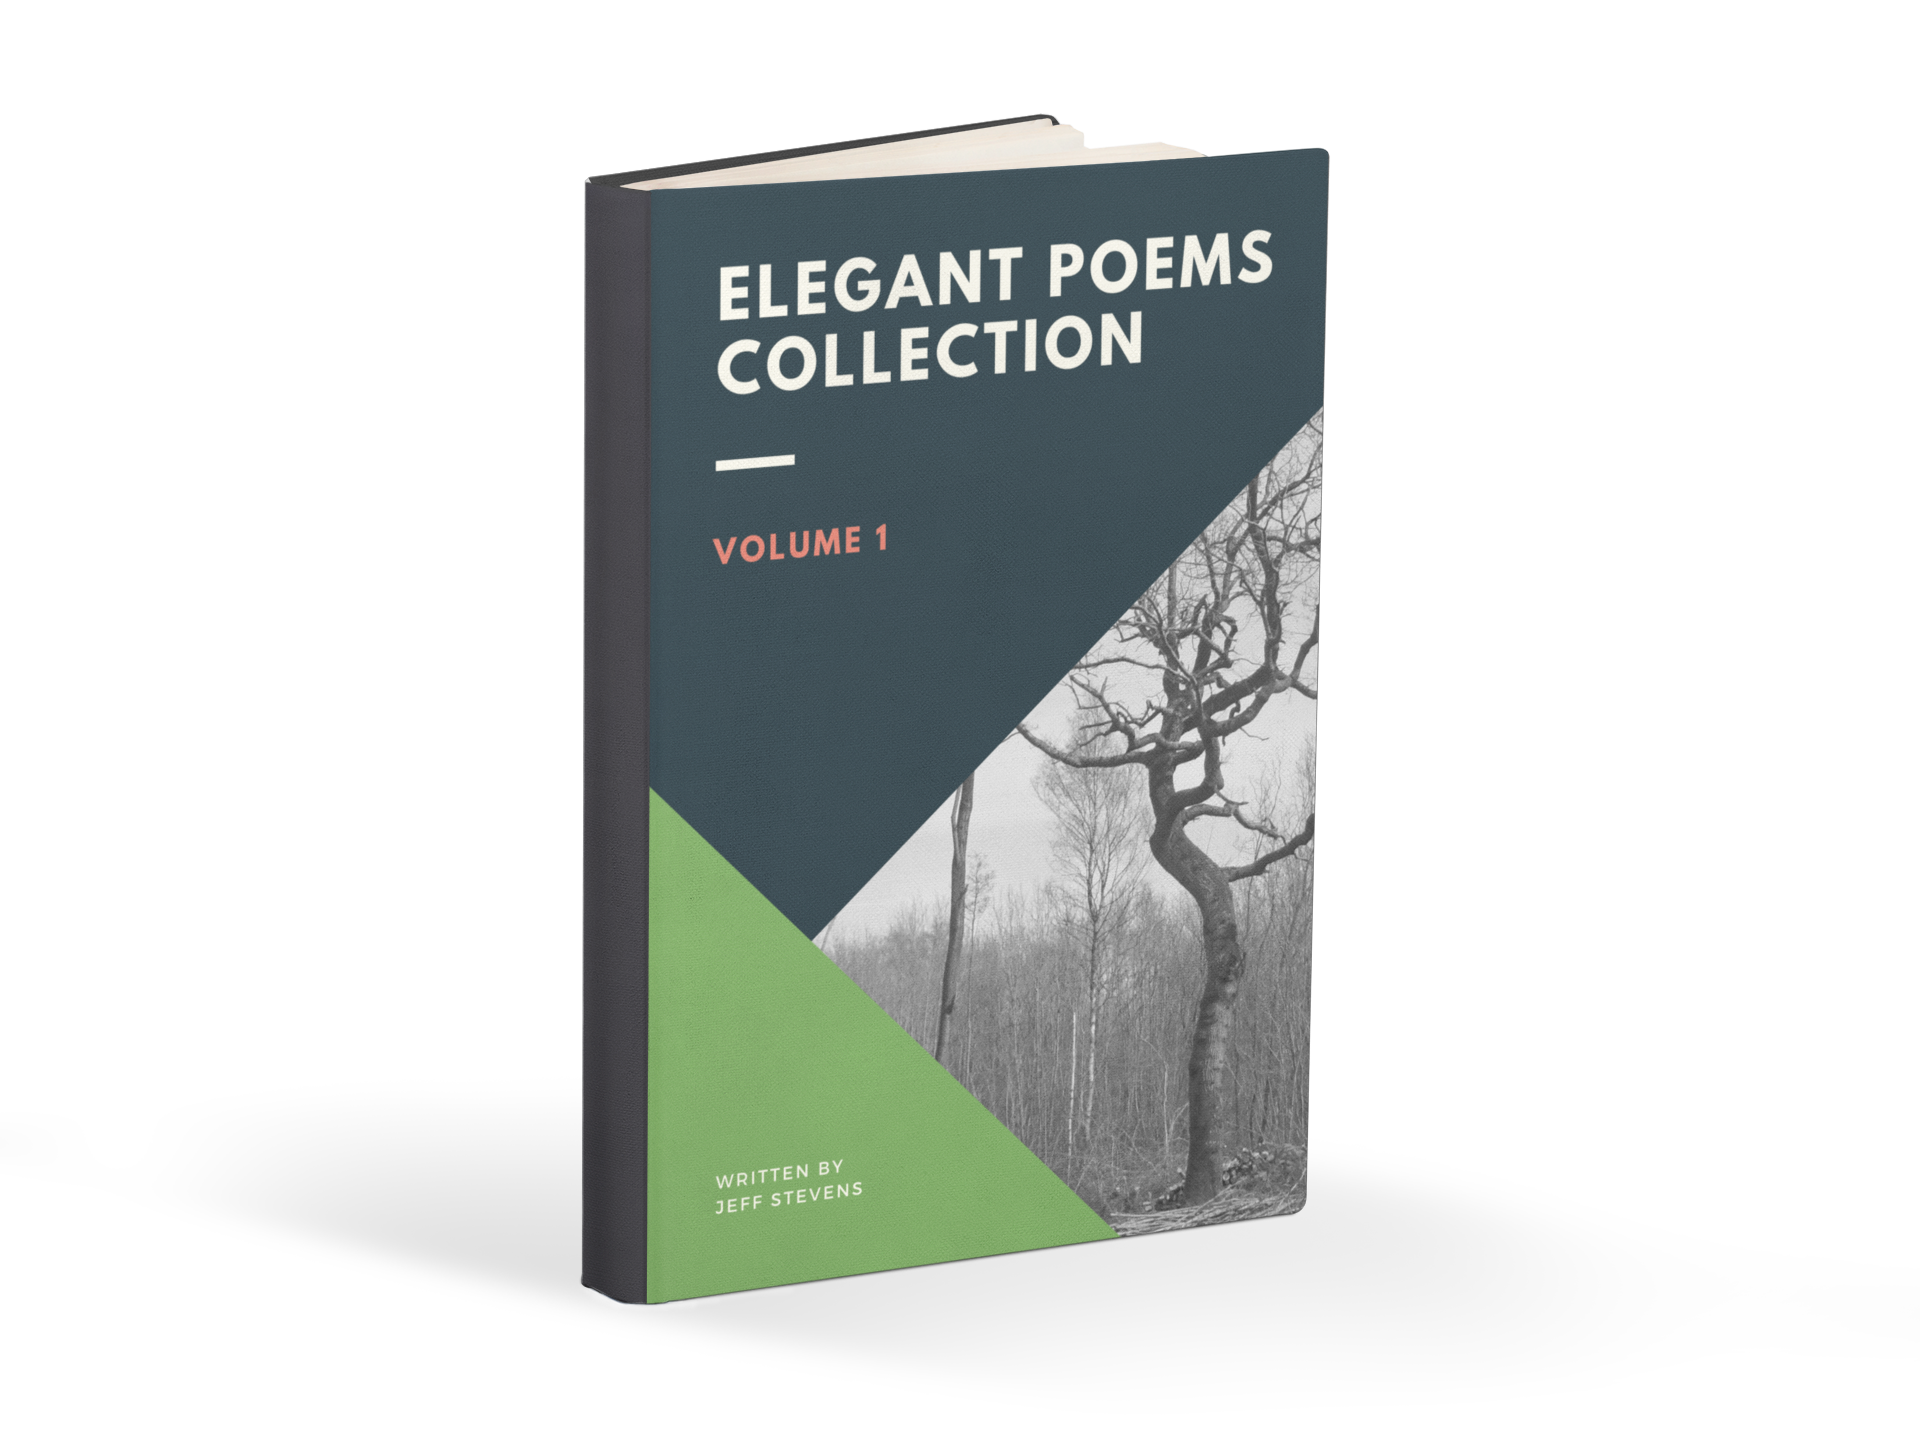 coppice-of-tales-elegant-poems-collection-vol-1-jeff-stevens